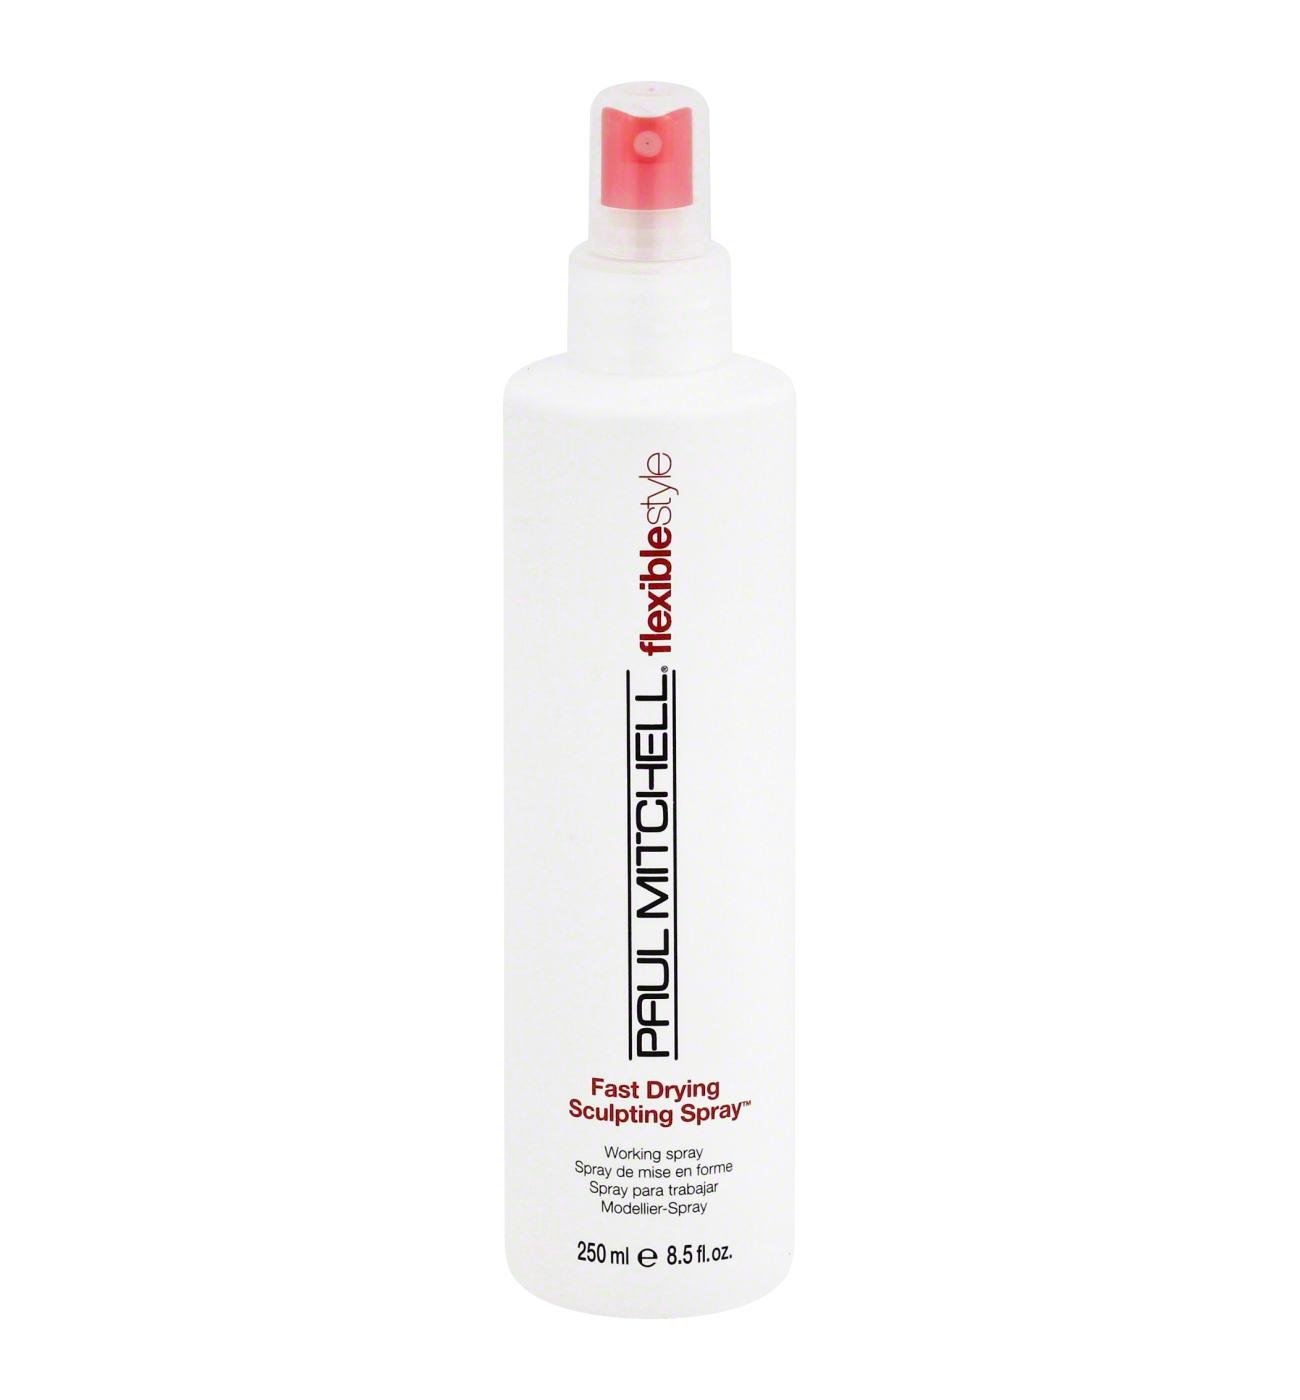 Paul Mitchell Fast Drying Sculpting Spray; image 2 of 2